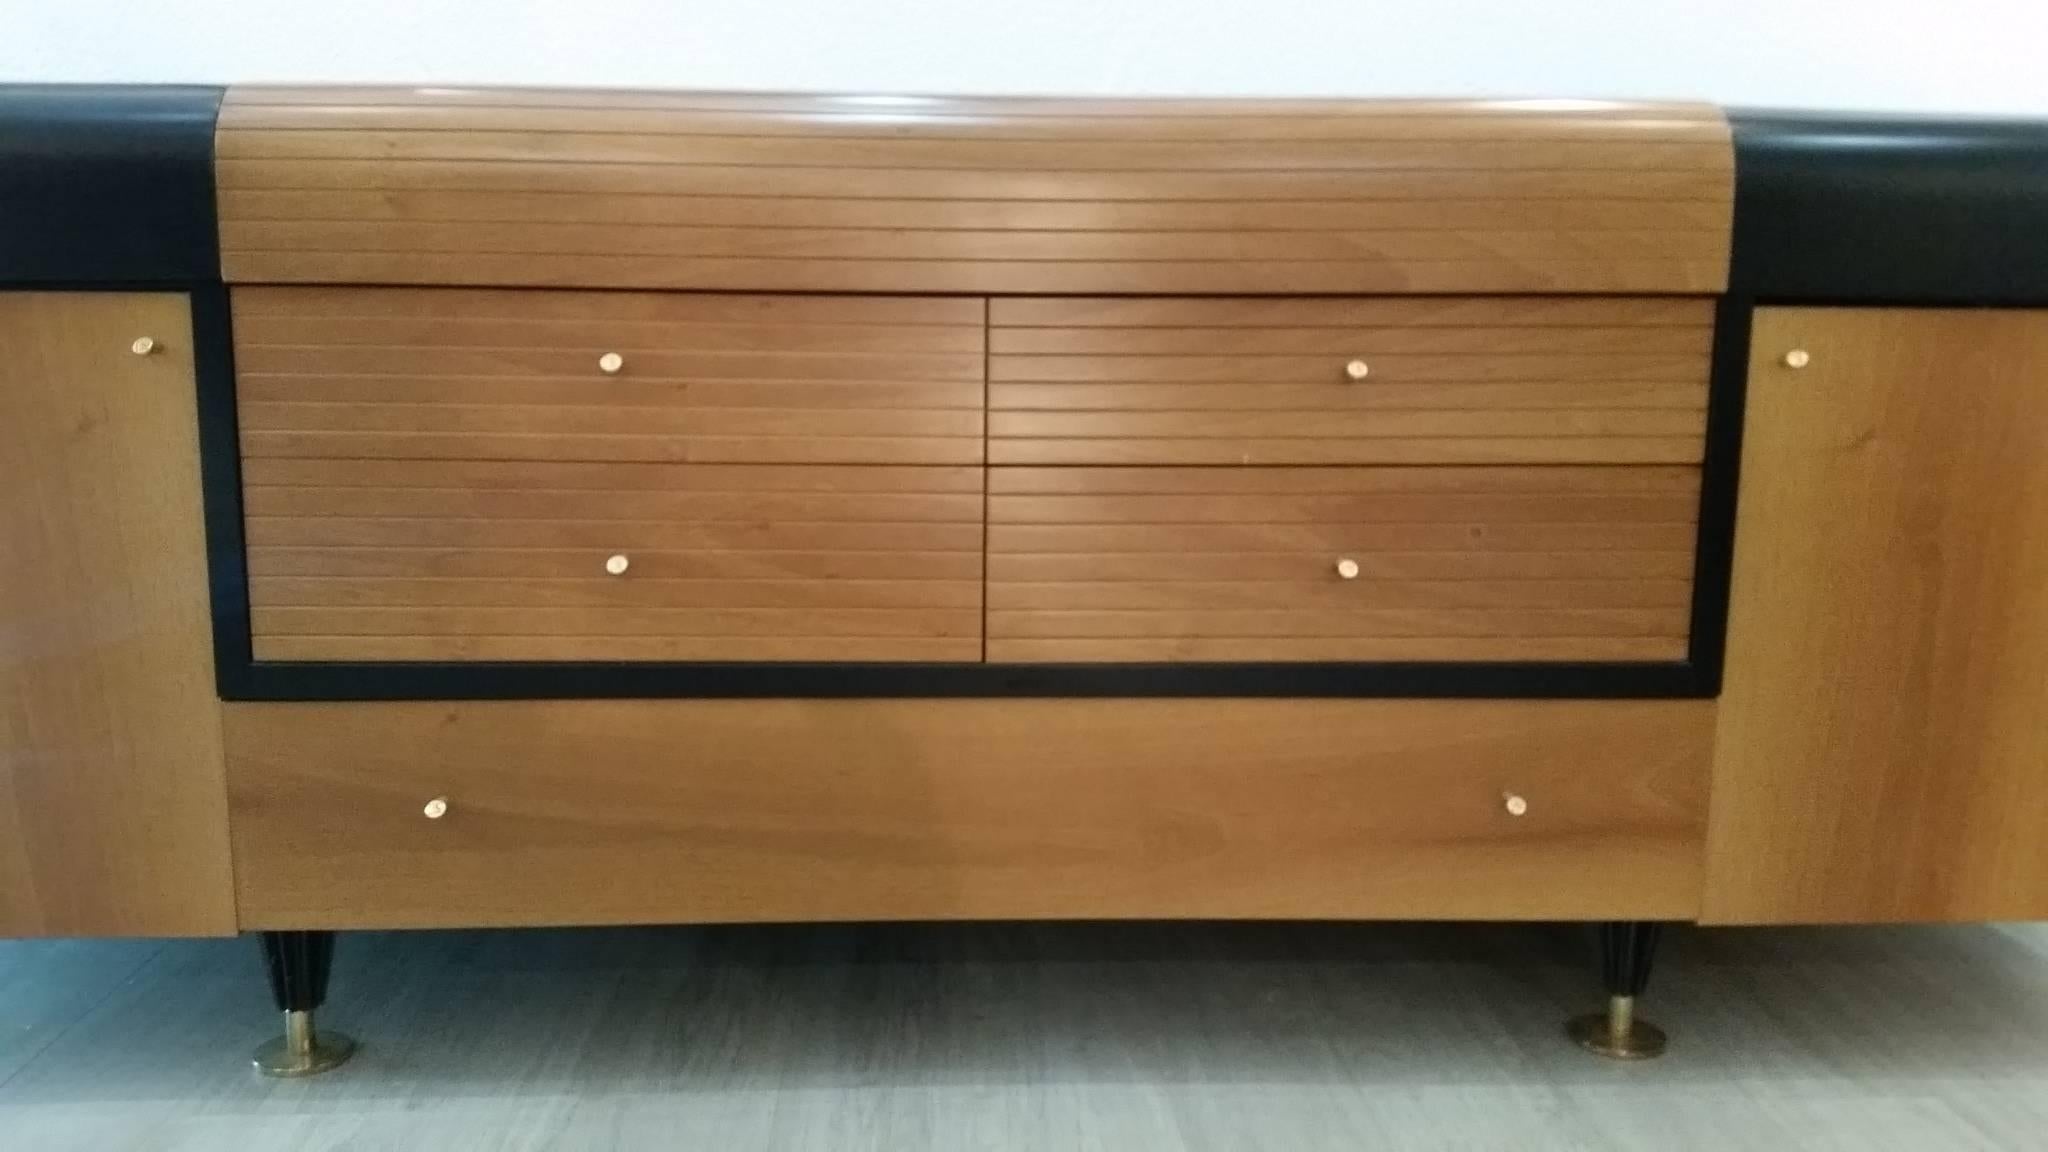 French Pierre Cardin Vintage Sideboard Black Lacquered Wood and Teak, circa 1980